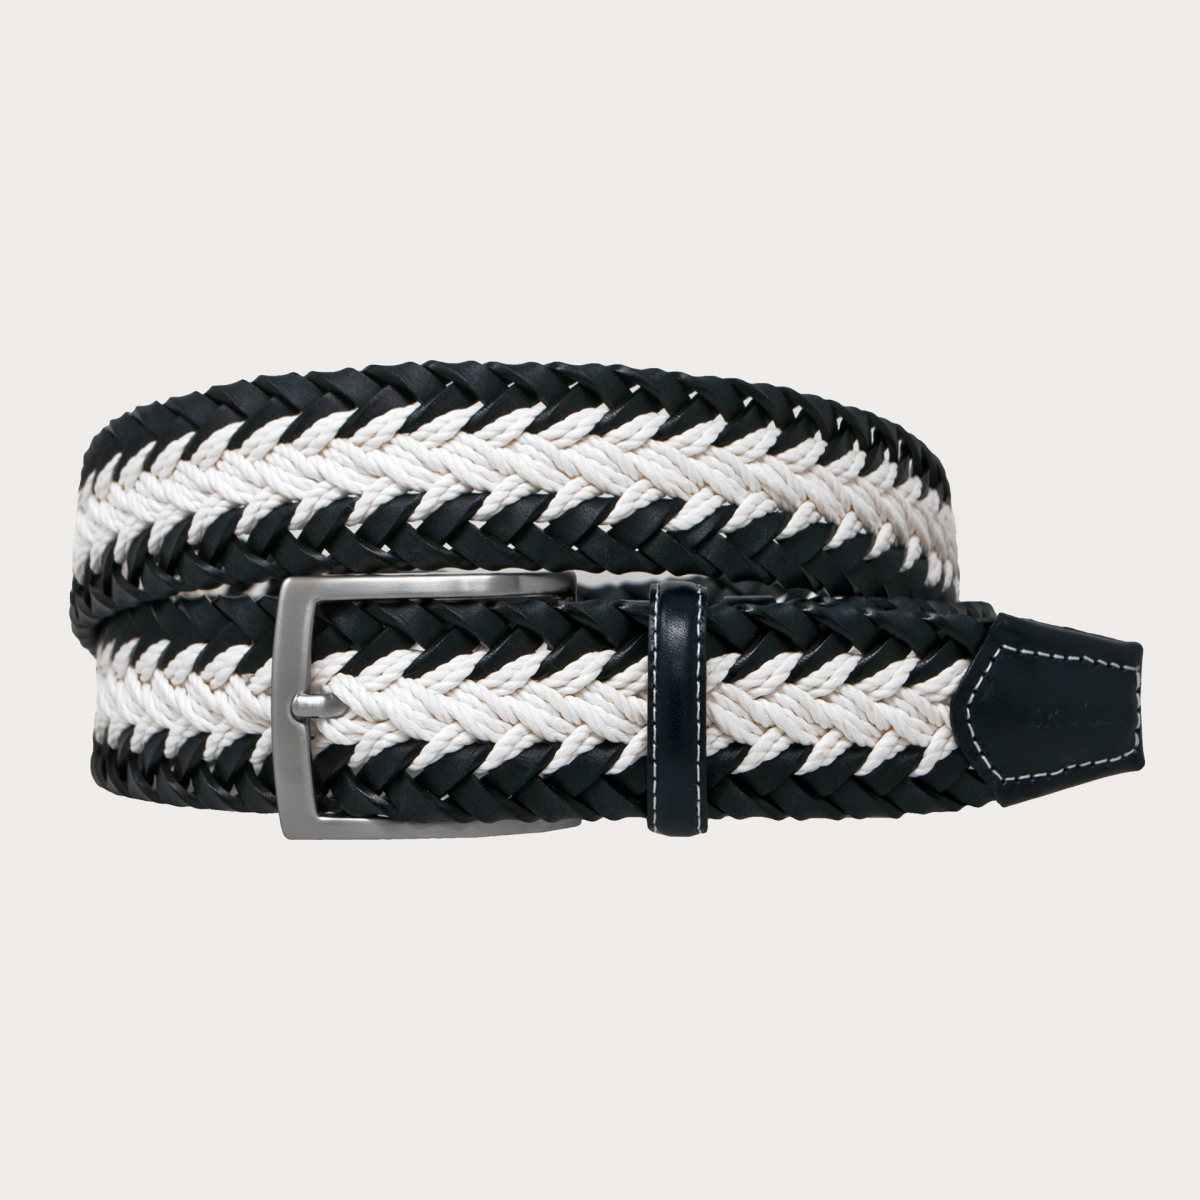 BRUCLE Black and white braided belt in leather, rope and cotton